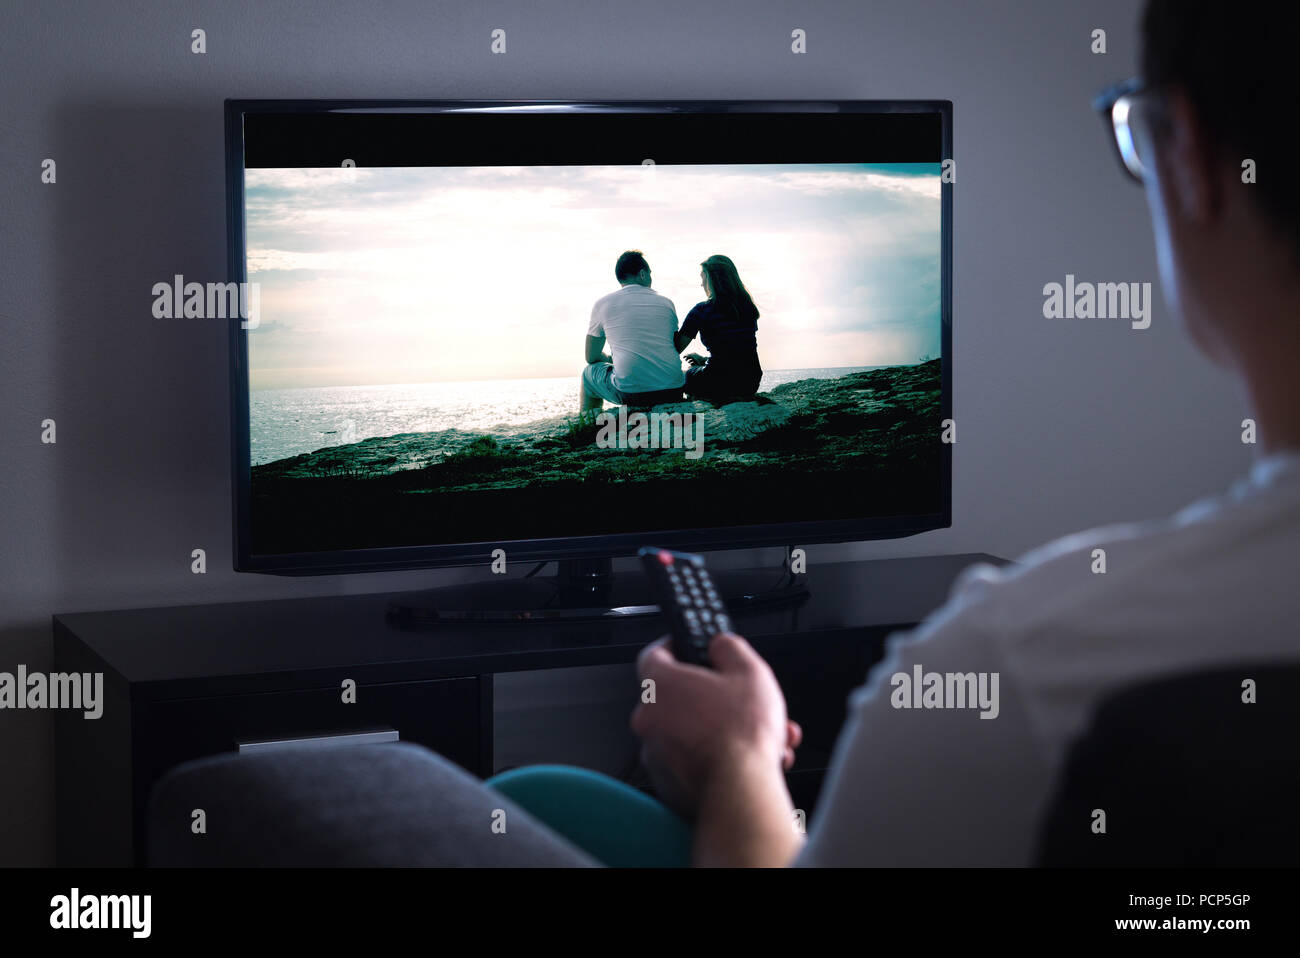 Man watching tv or streaming movie or series with smart tv at home. Film or show on television screen. Person holding the remote control. Stock Photo